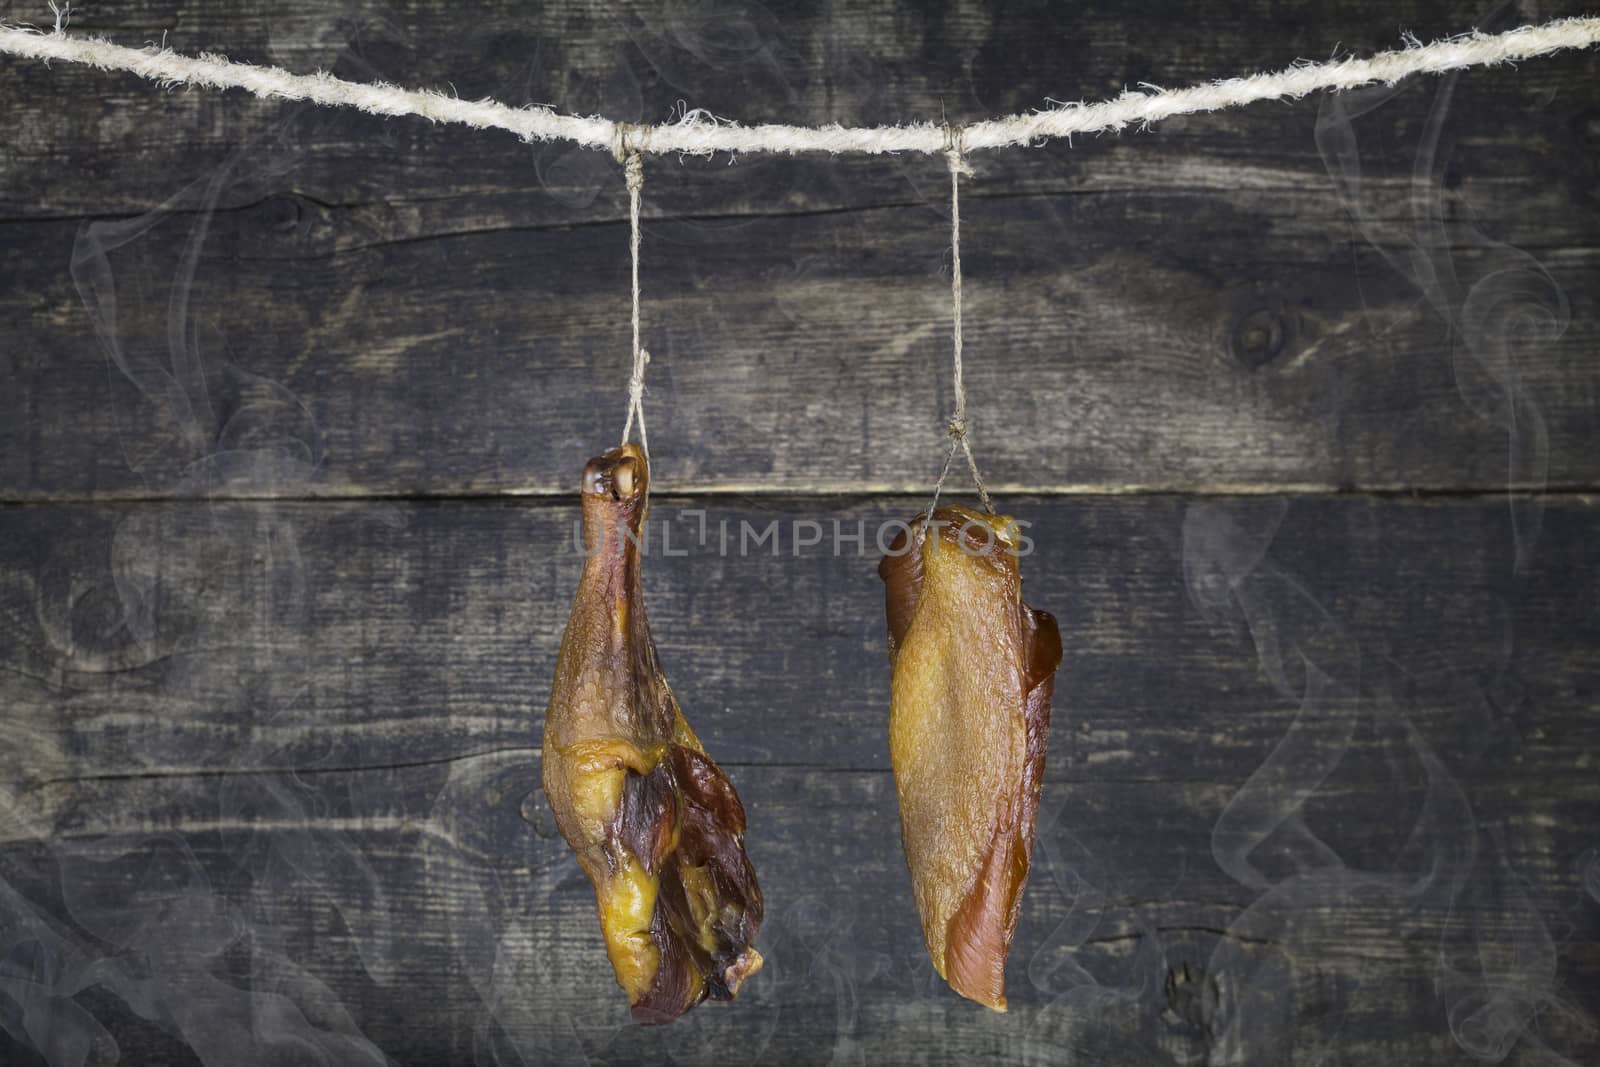 Smoked Chicken Meat Hanging on the Rope Against Wooden Background With Smoke